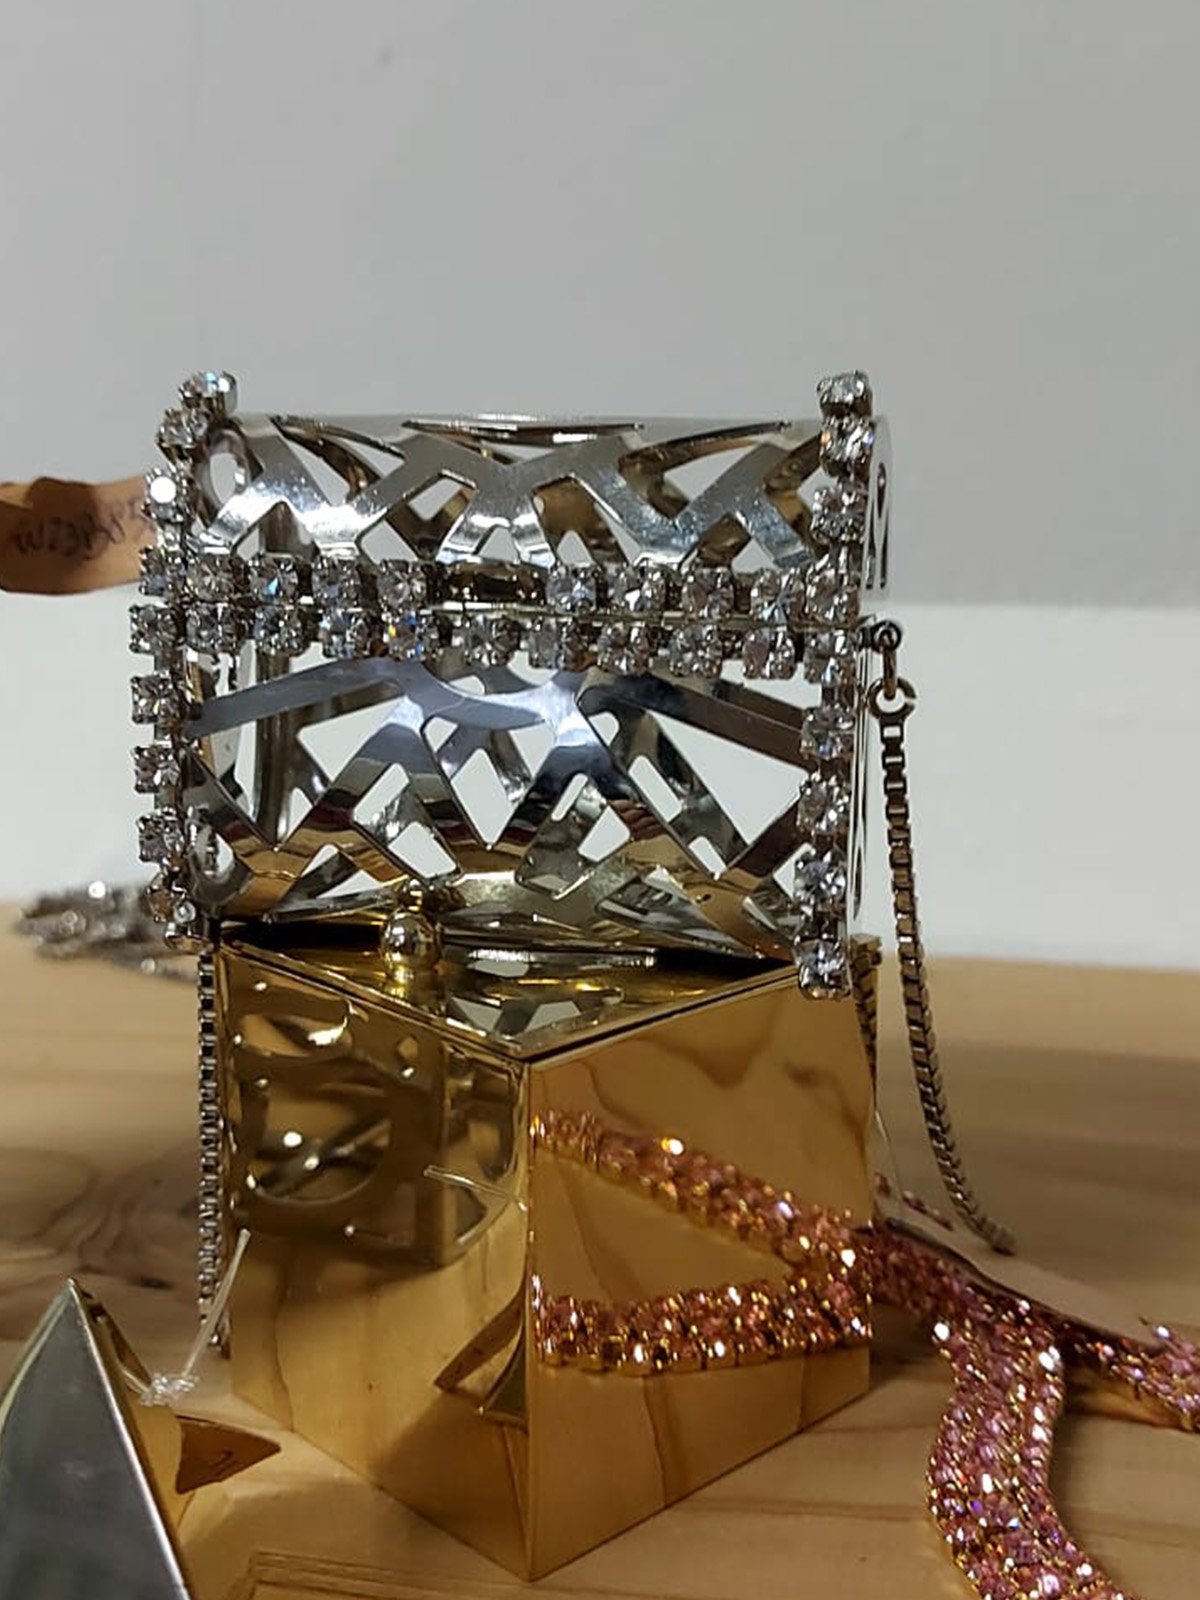 Minibag passion: the metal creations of River Jewel